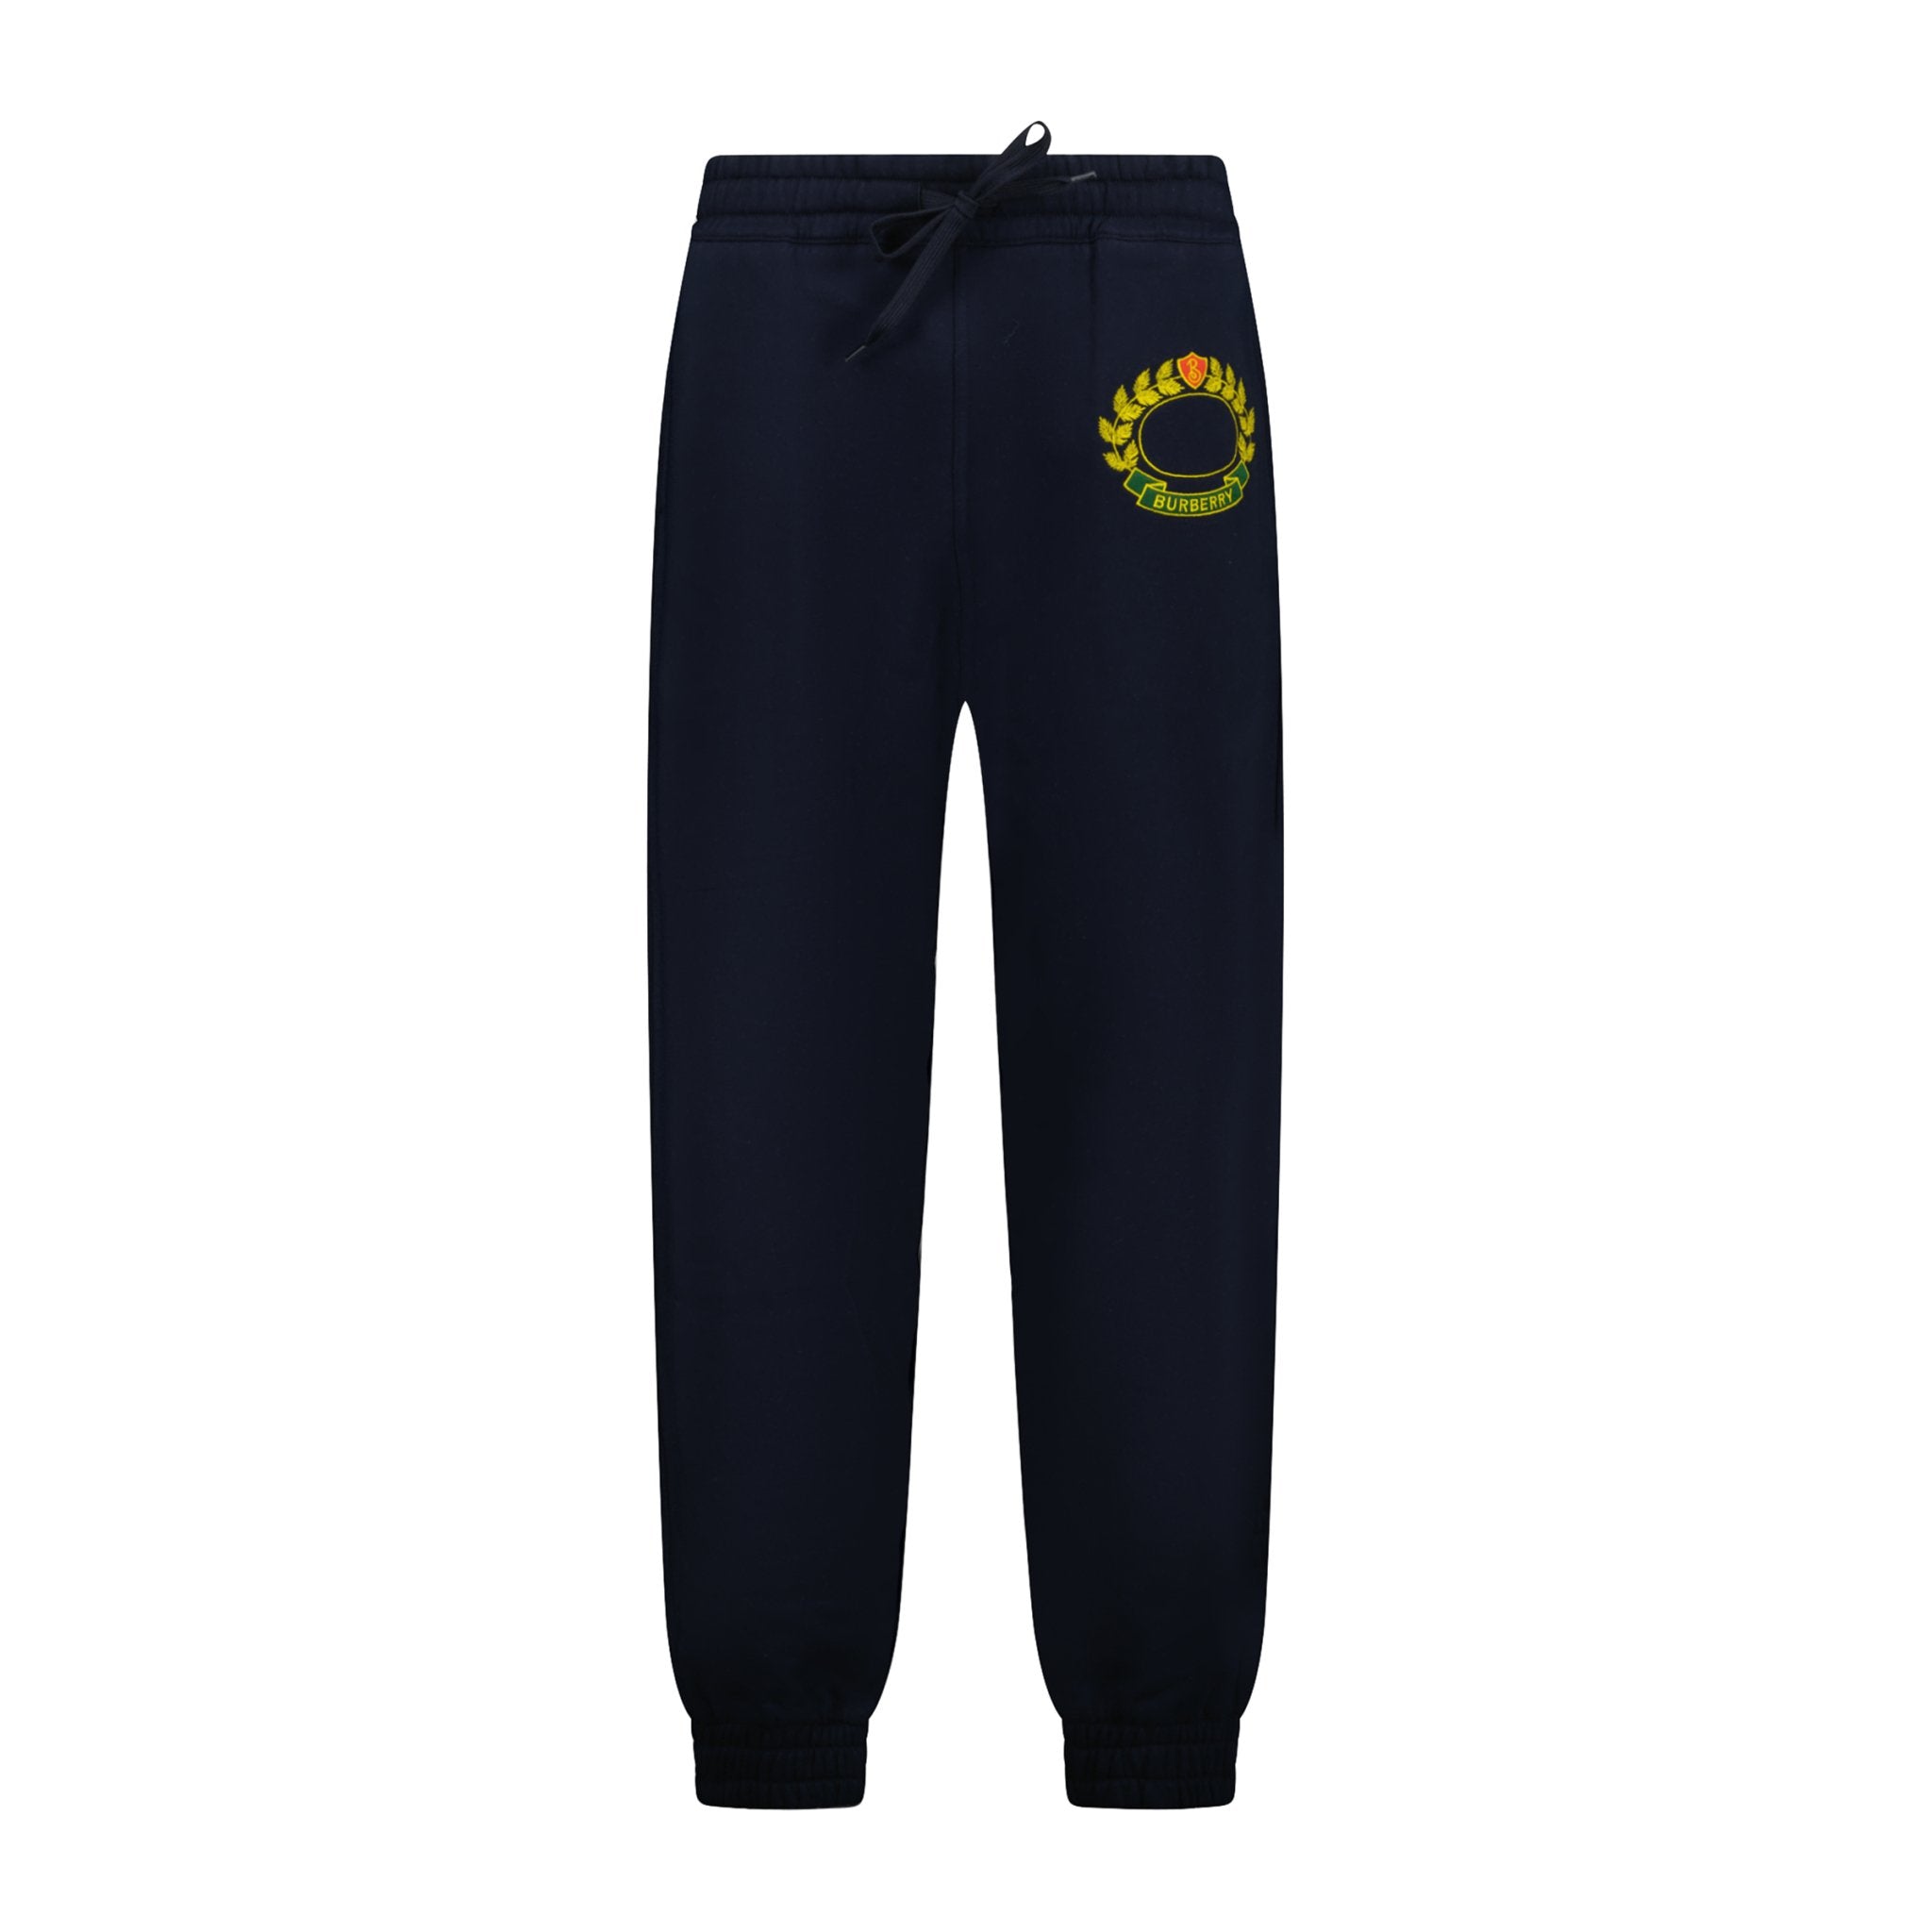 Burberry 'Oxted' Logo Cuffed Navy Sweat Pants